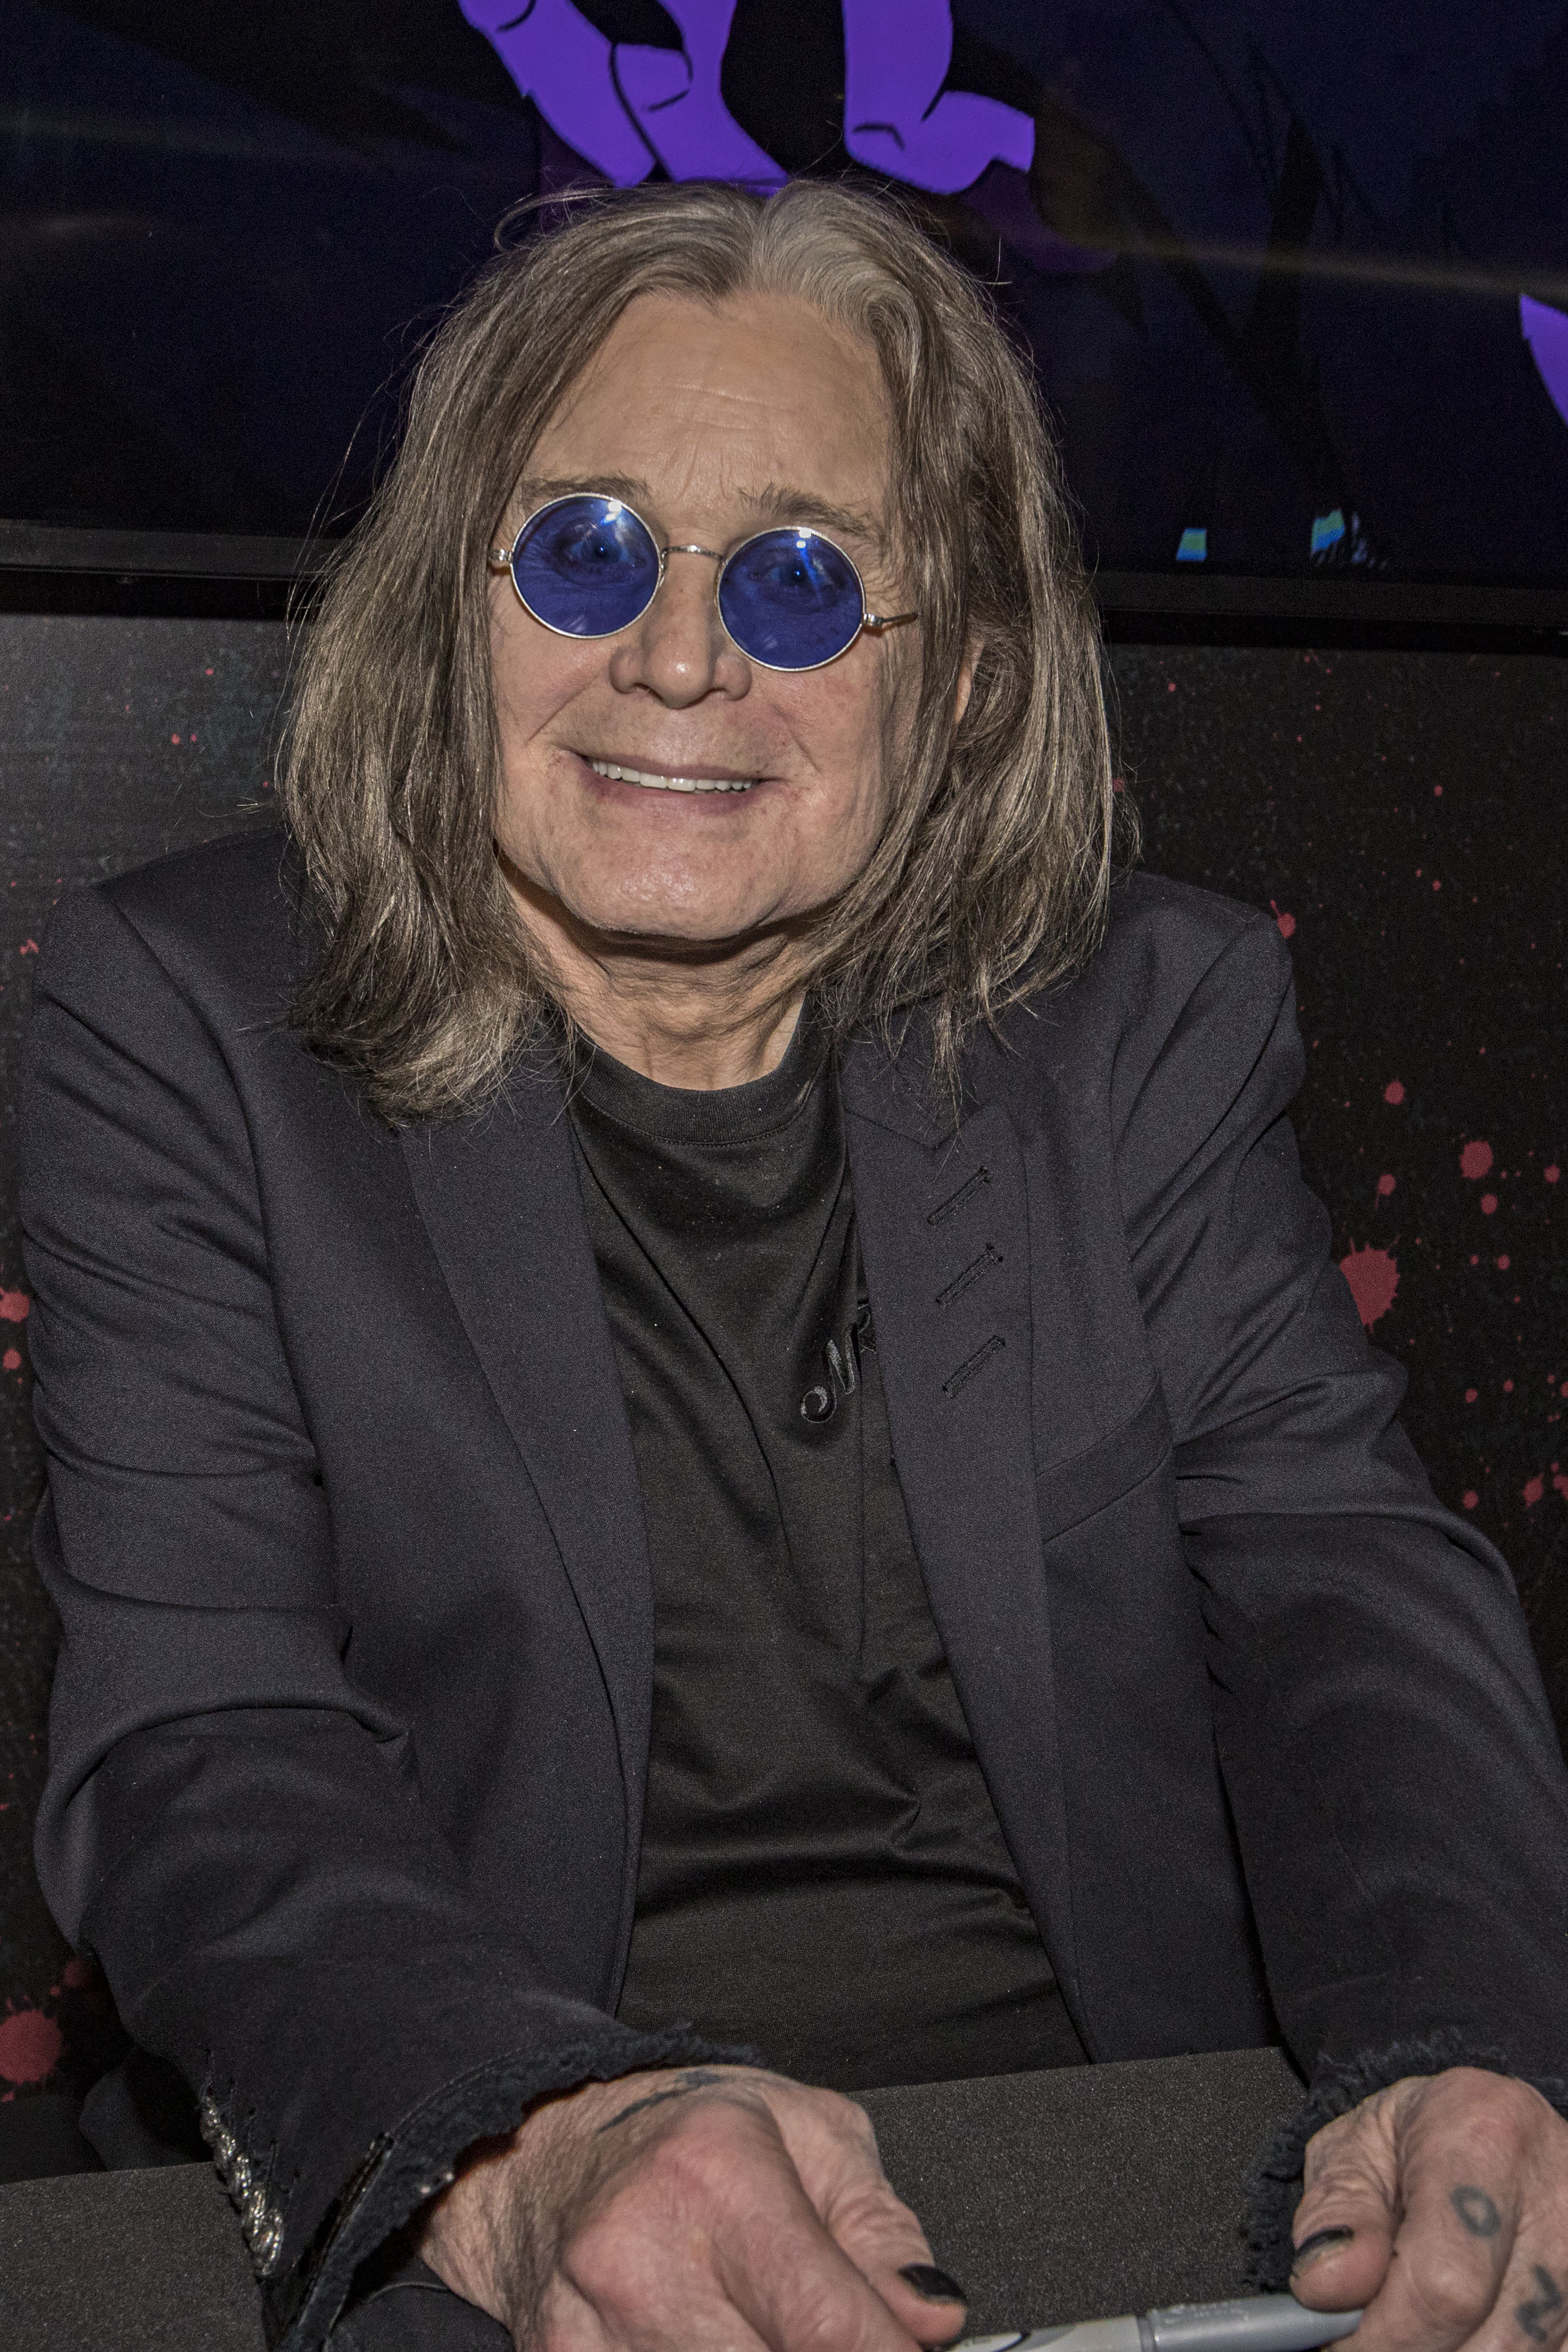 Ozzy Osbourne at a signing during Comic-Con International Day 2 on July 22, 2022, in San Diego, California | Source: Getty Images